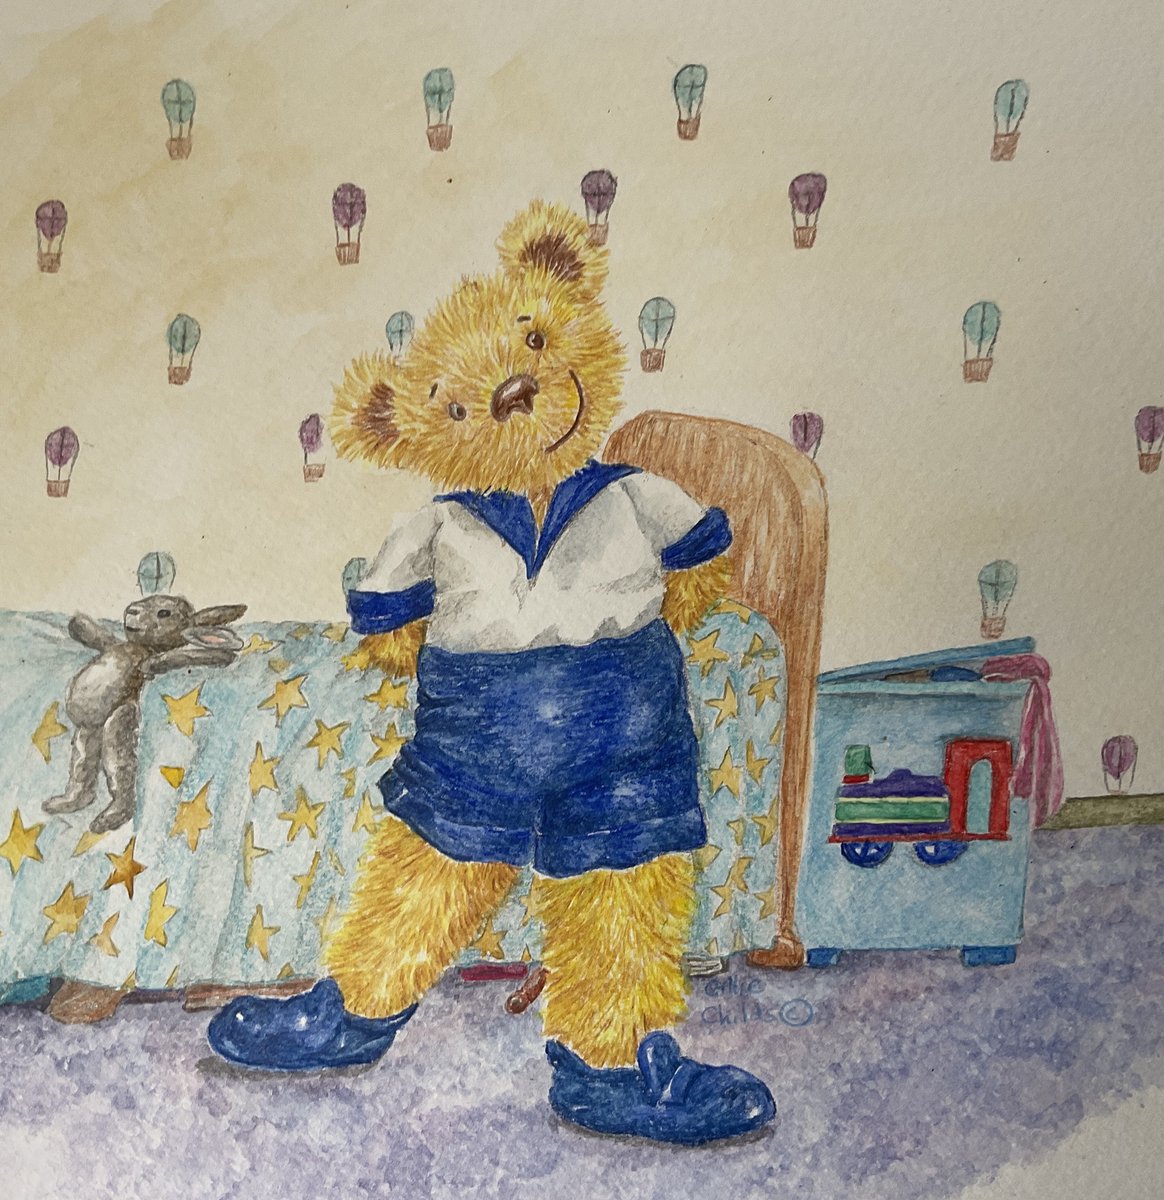 Charlie kept his bedroom tidy.
Well, most of it was pushed under the bed, but the thought was there.
#CharlieAllshapes #childrensstory #kidlit #kidlitart #illustration